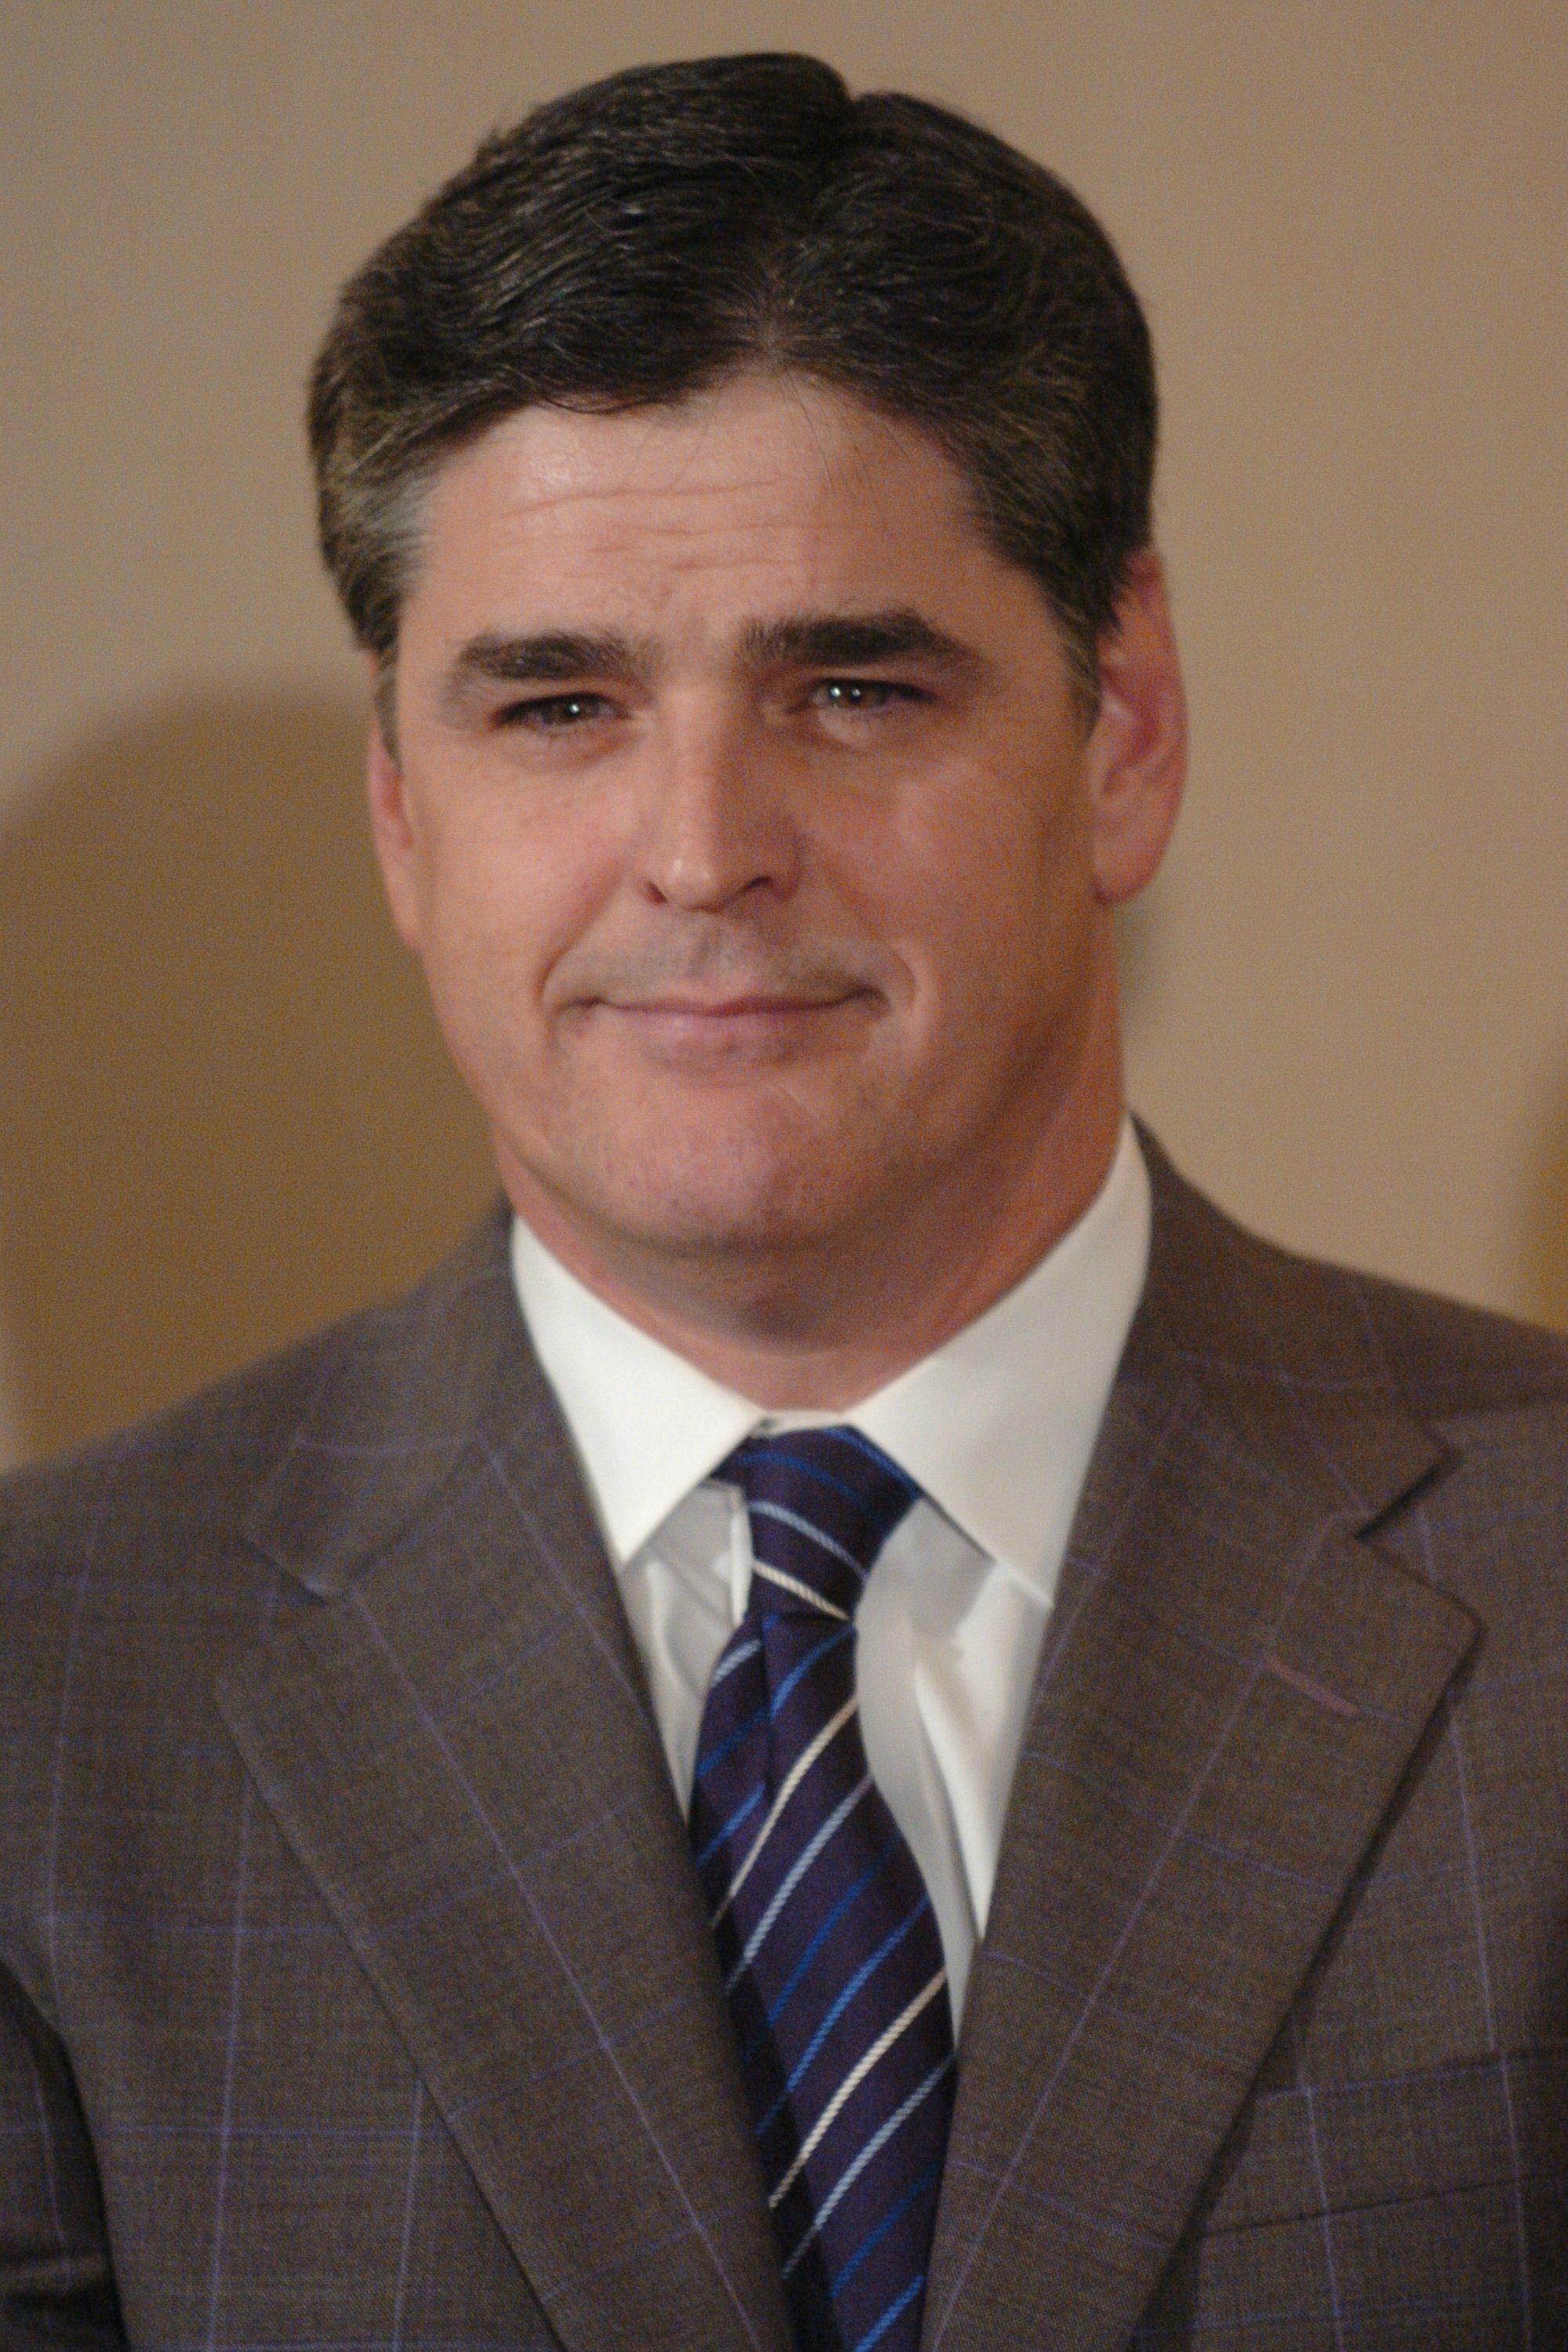 Sean Hannity at the New York celebration of CORE's Martin Luther King Federal Holiday on January 17, 2005 | Source: Getty Images